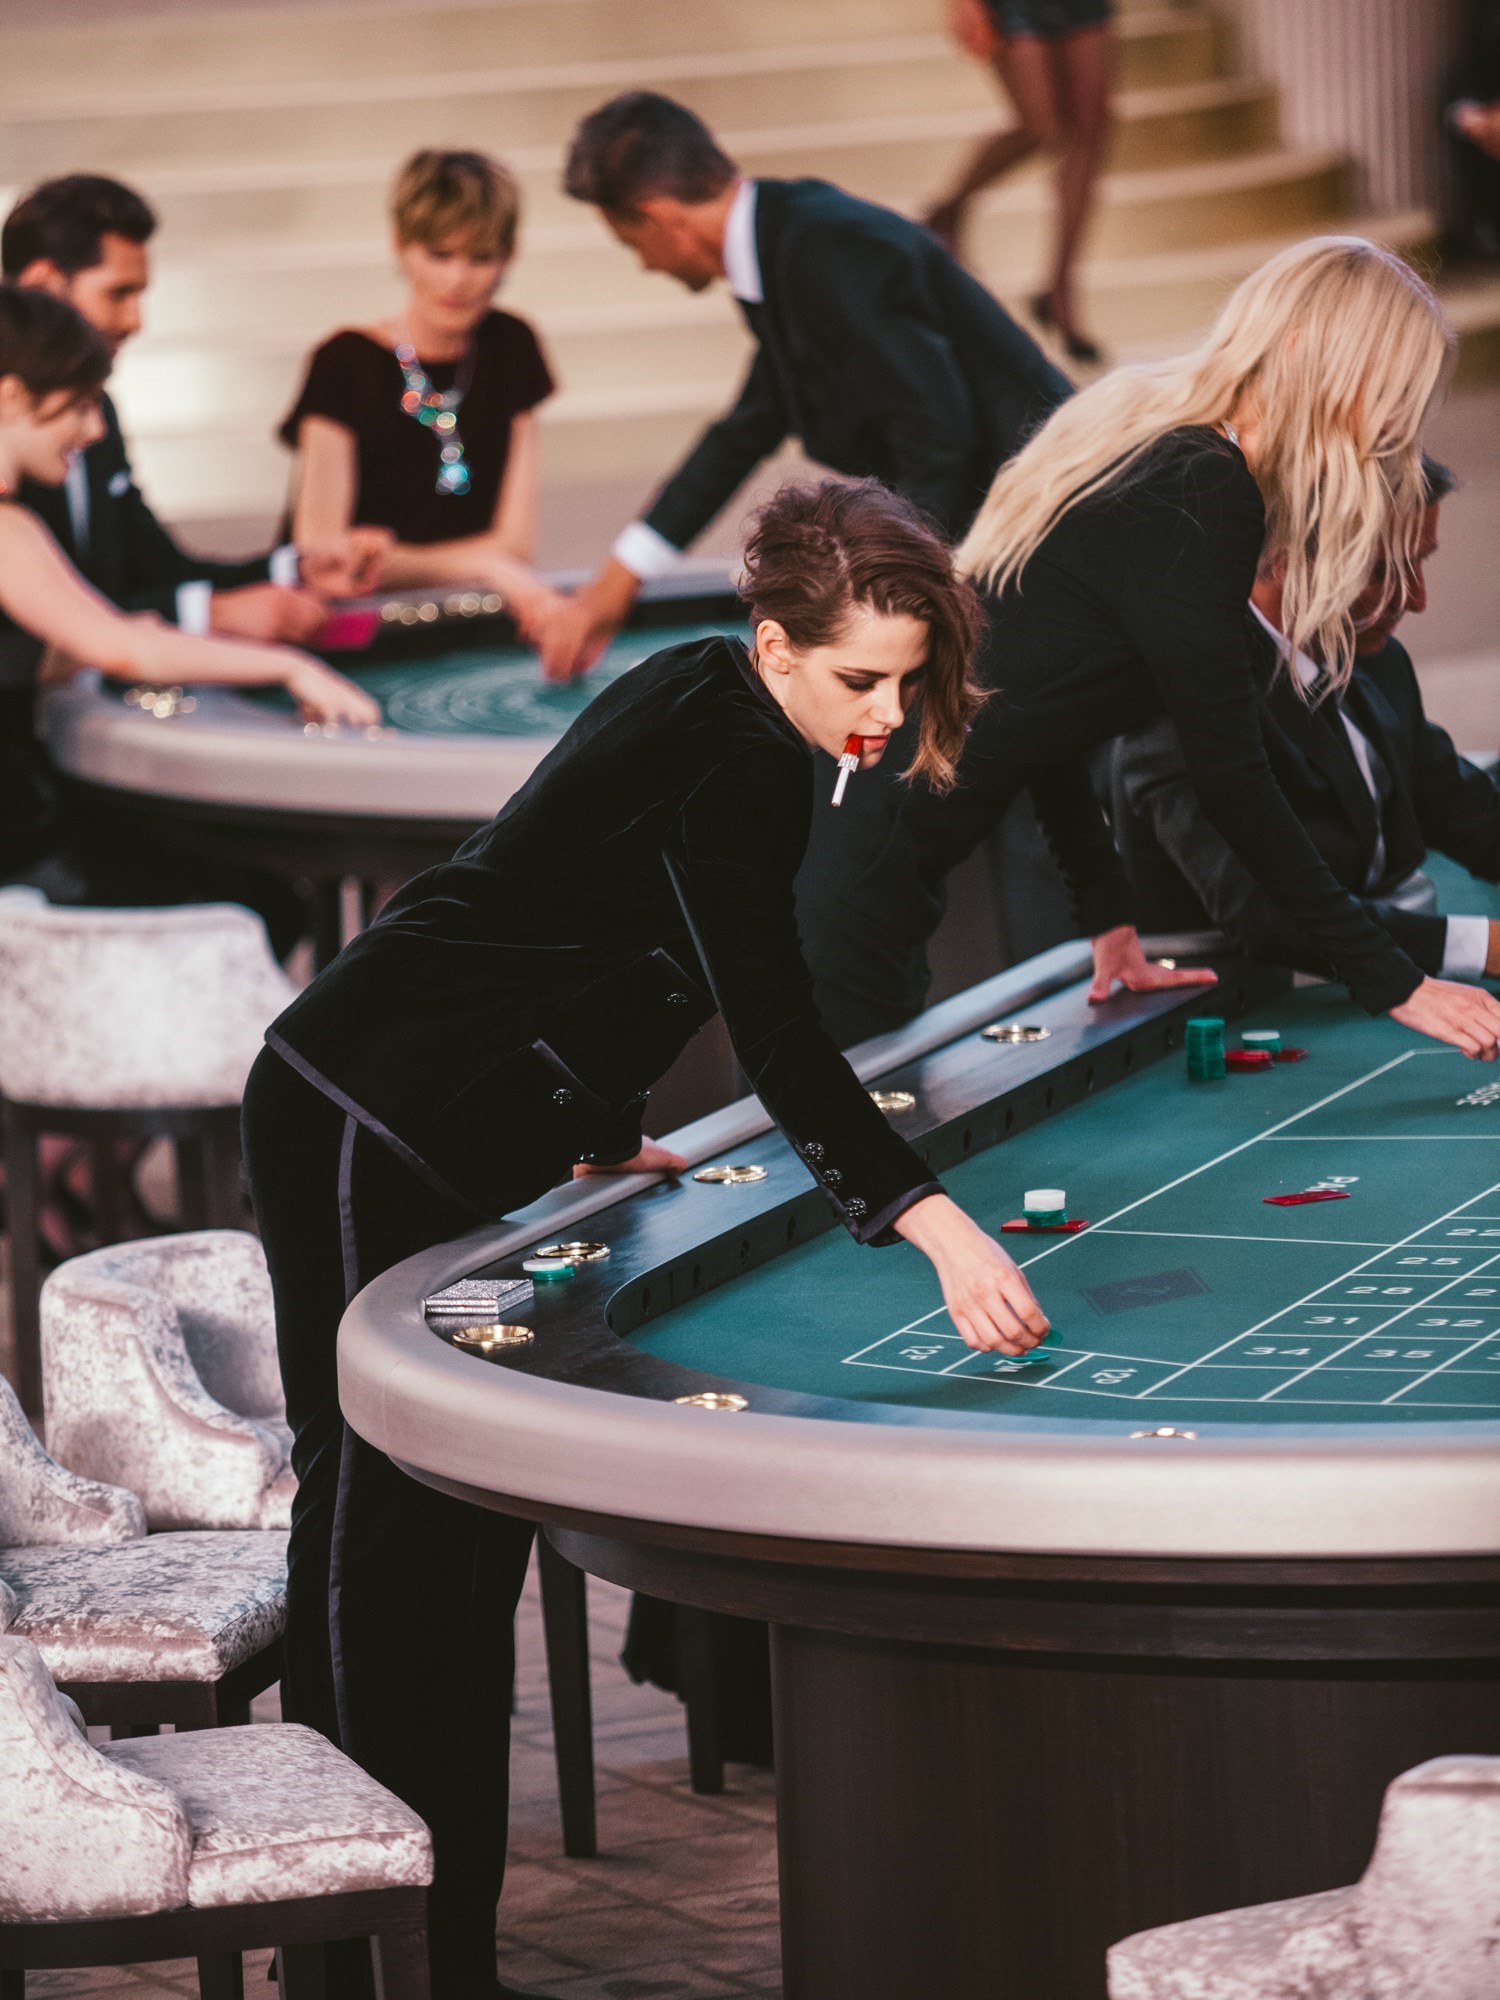 A gang of A-Listers just played poker on Chanel's runway